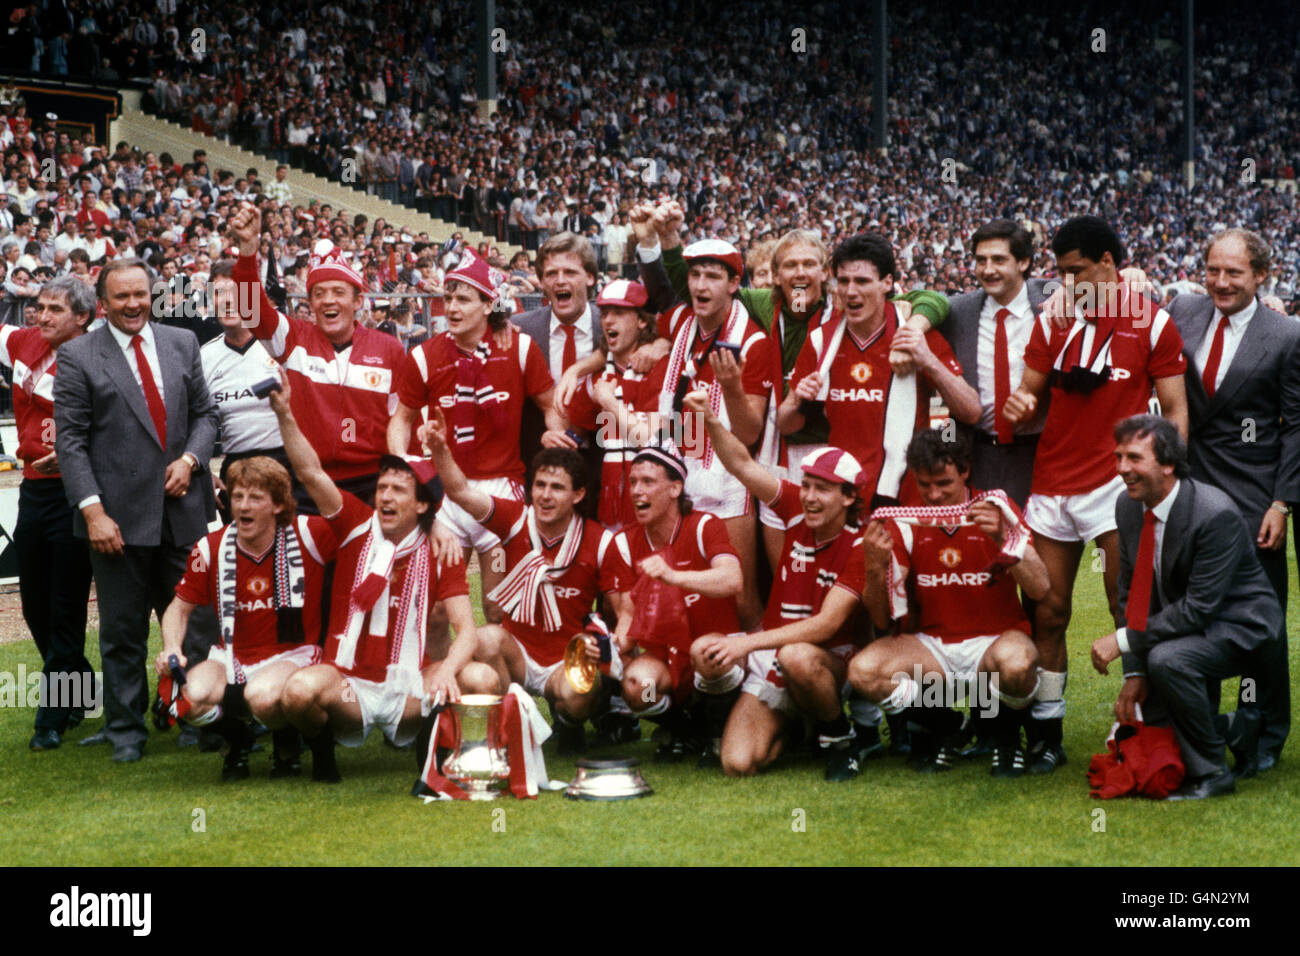 Manchester United celebrate with the FA Cup after beating Everton 1-0 in the final. (back l-r) Ron Atkinson, unknown, unknown, Mark Hughes, Gordon McQueen, Jesper Olsen, Norman Whiteside, unknown, Gary Bailey, Frank Stapleton, Greame Hogg, Paul Grath, and Gary Brazil. (front l-r) Gordon Strachan, John Gidman, Arthur Albiston, Mike Duxbury, Bryan Robson and Kevin Moran. Stock Photo